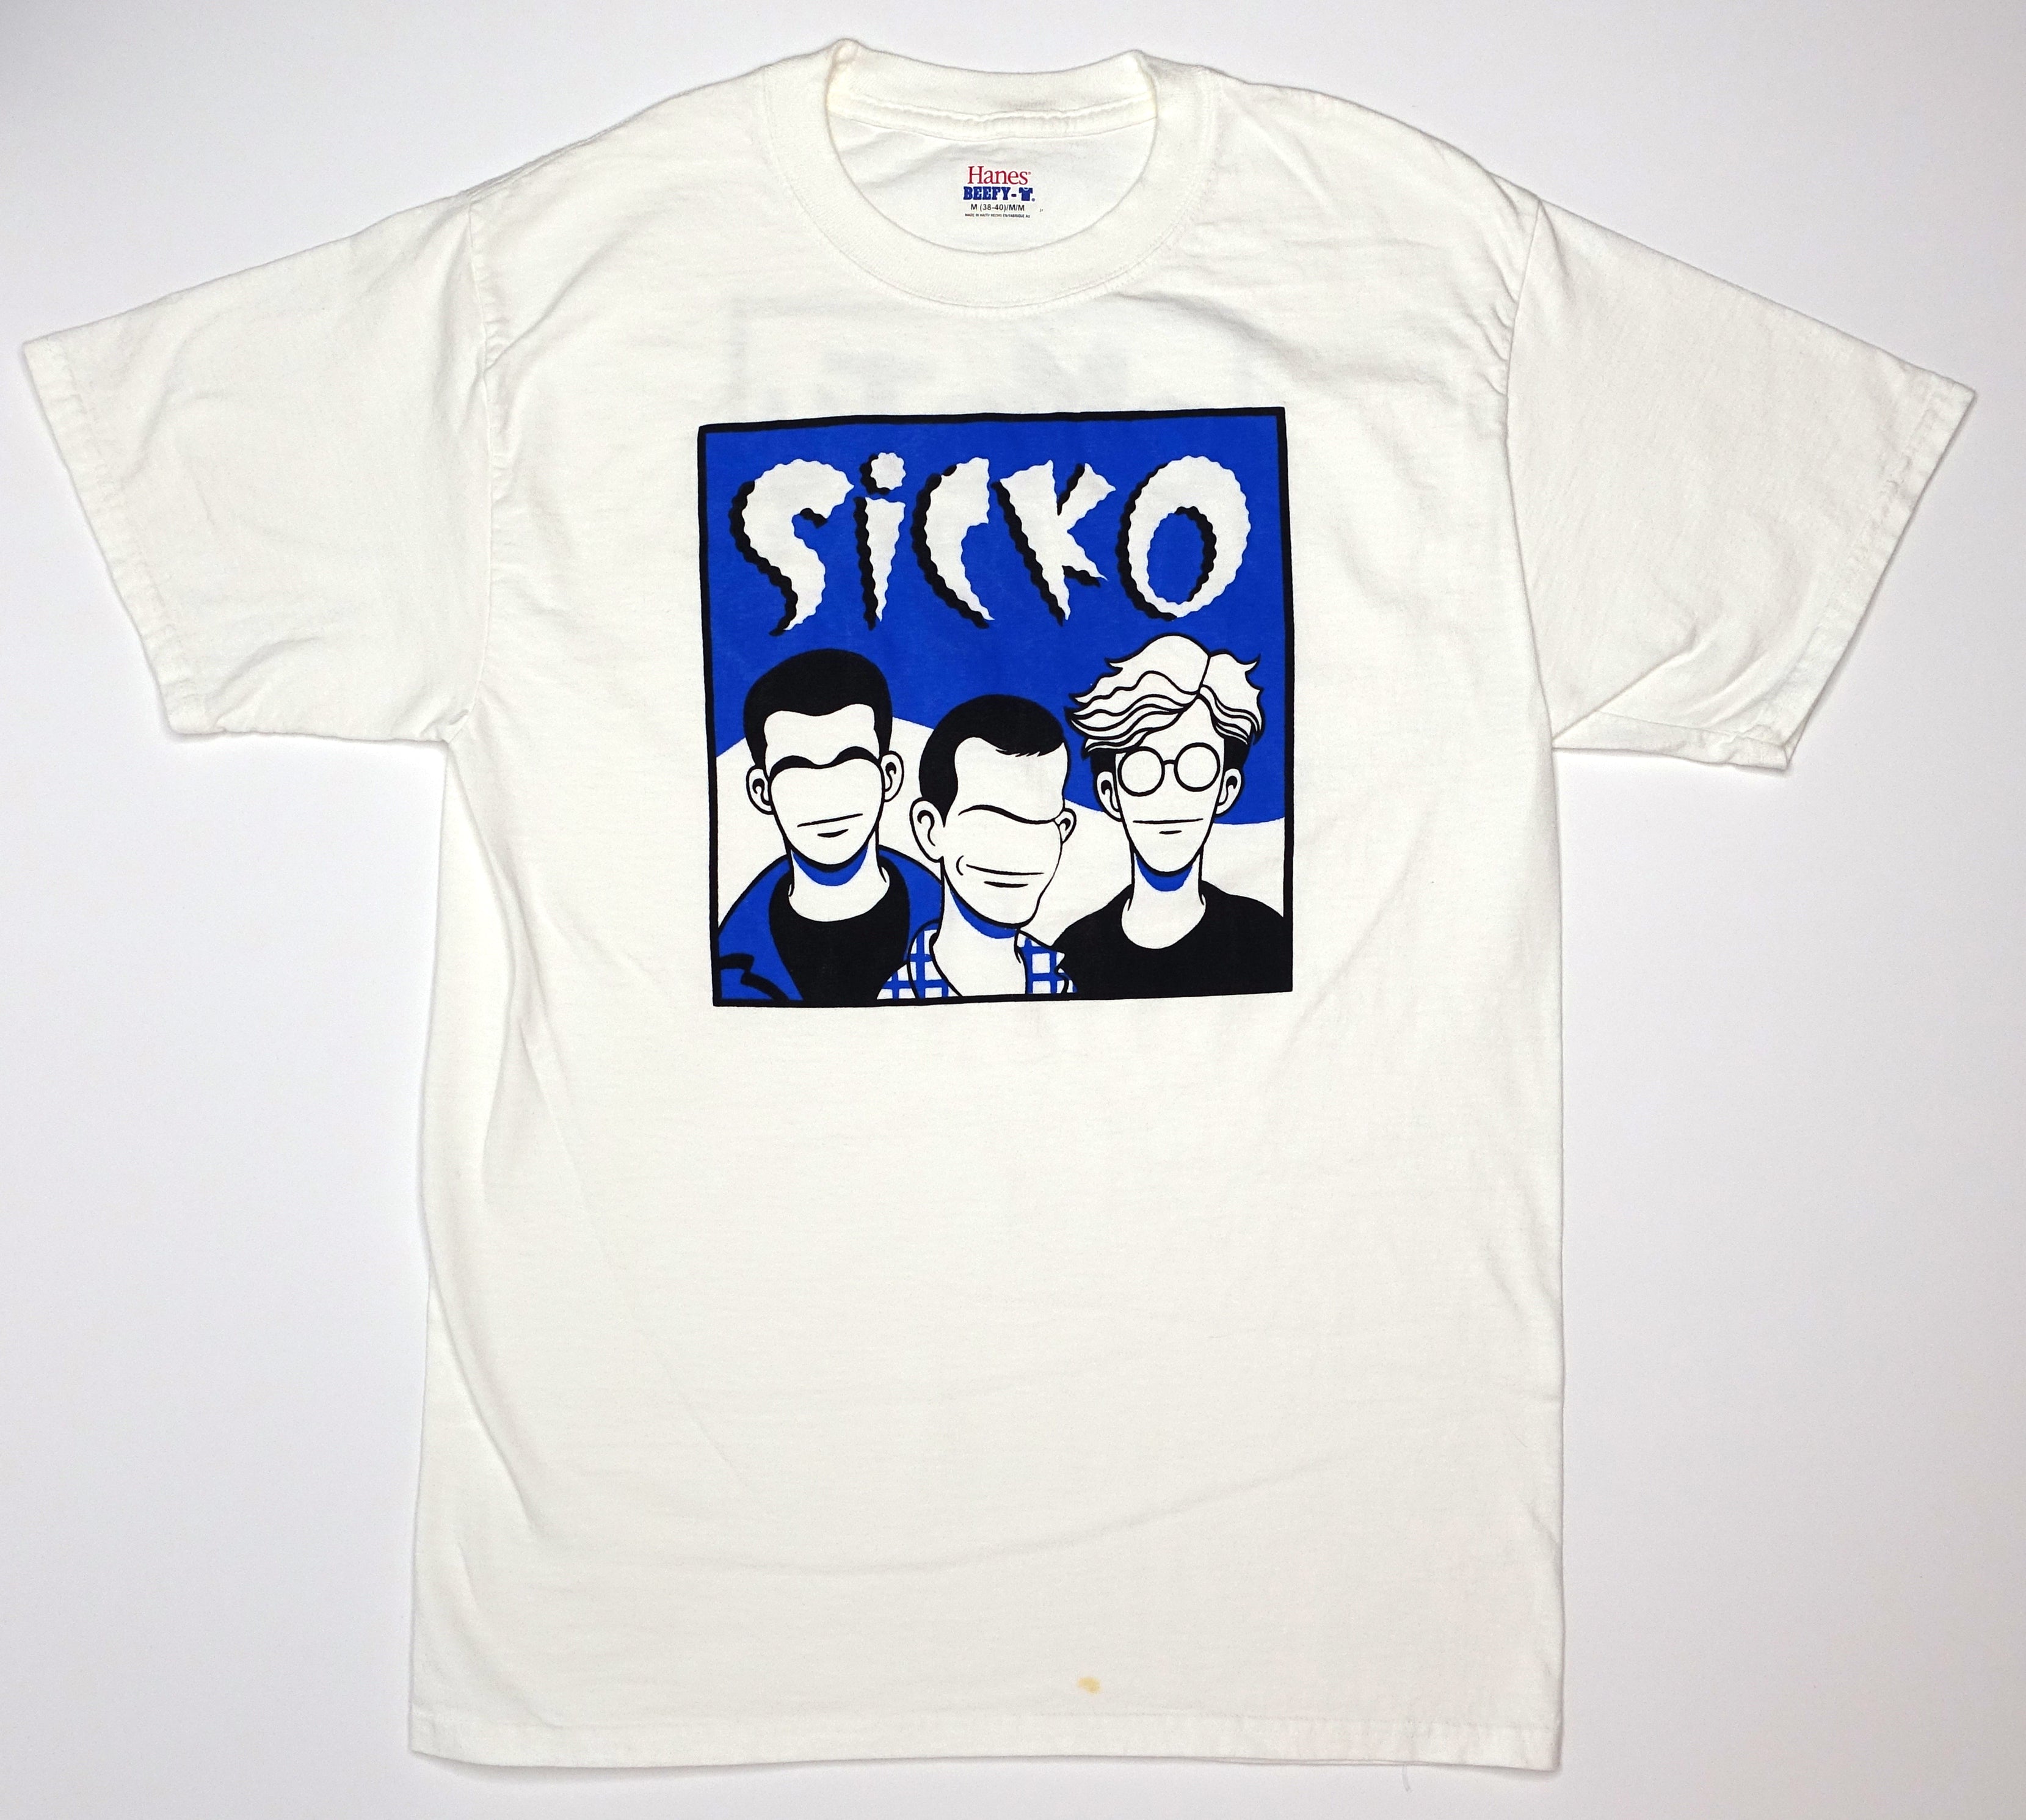 Sicko - Count Me Out / Empty Records 00's Shirt Size Medium